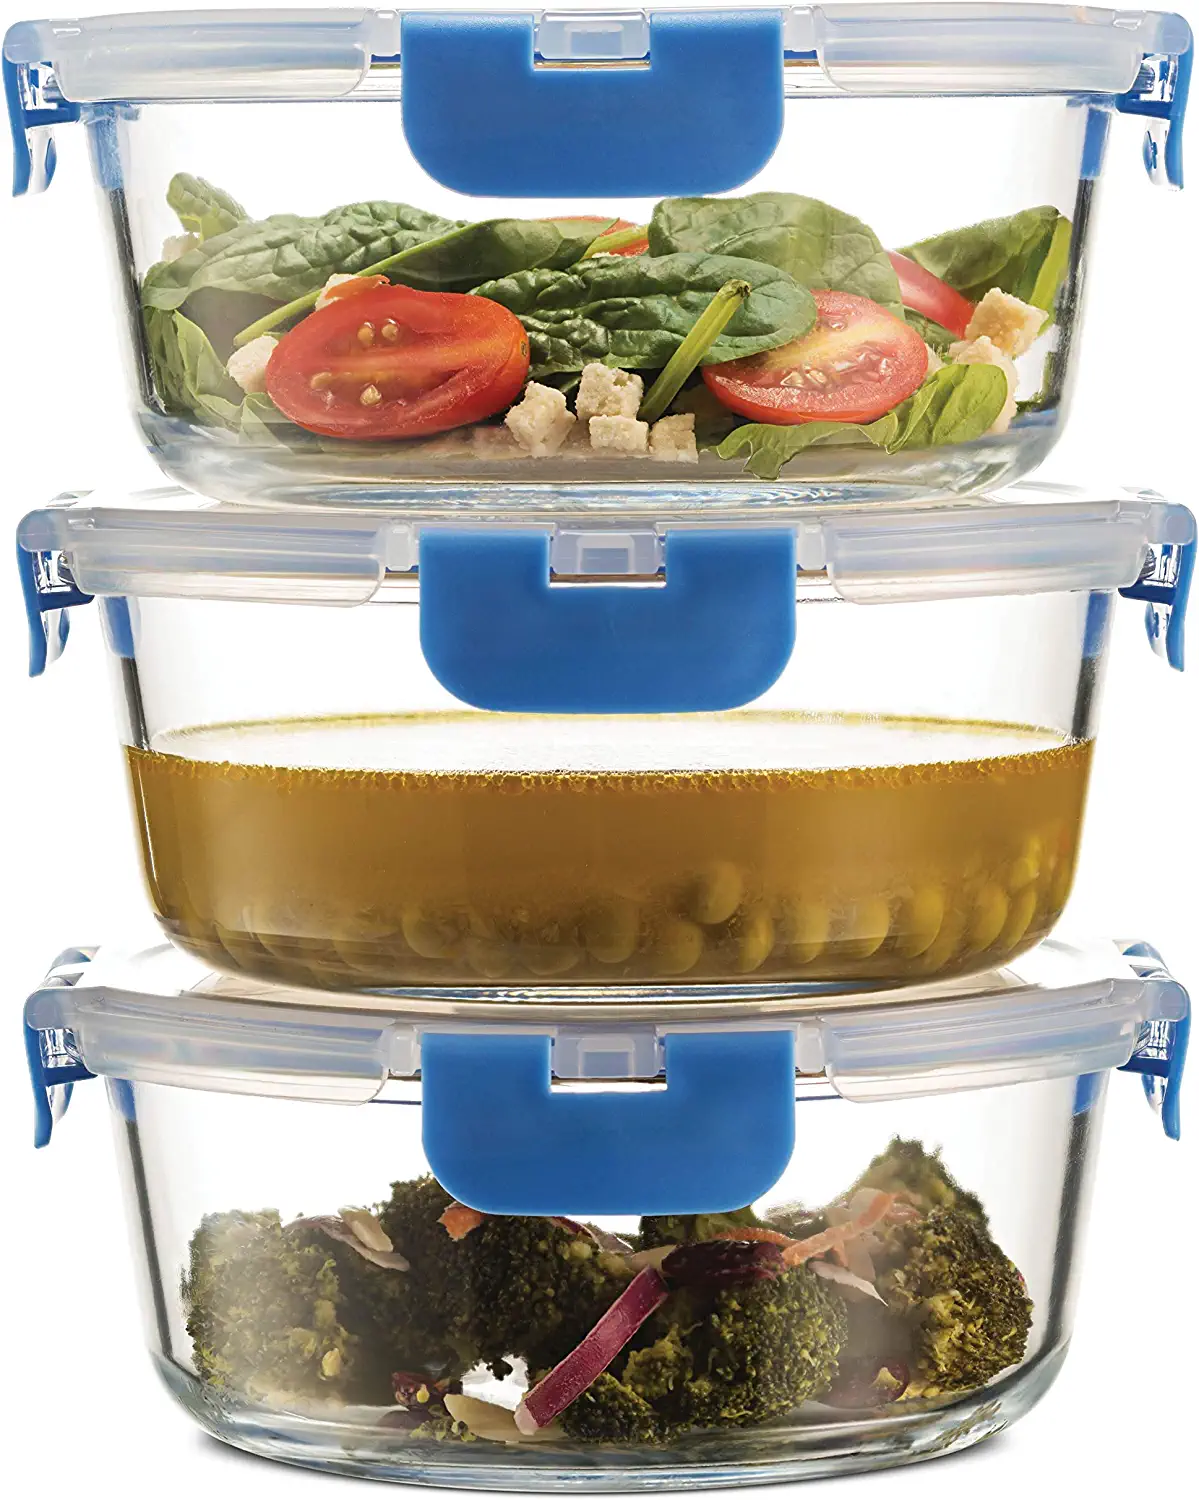 EZ Prepa [20 Pack] 32oz 3 Compartment Meal Prep Containers with Lids